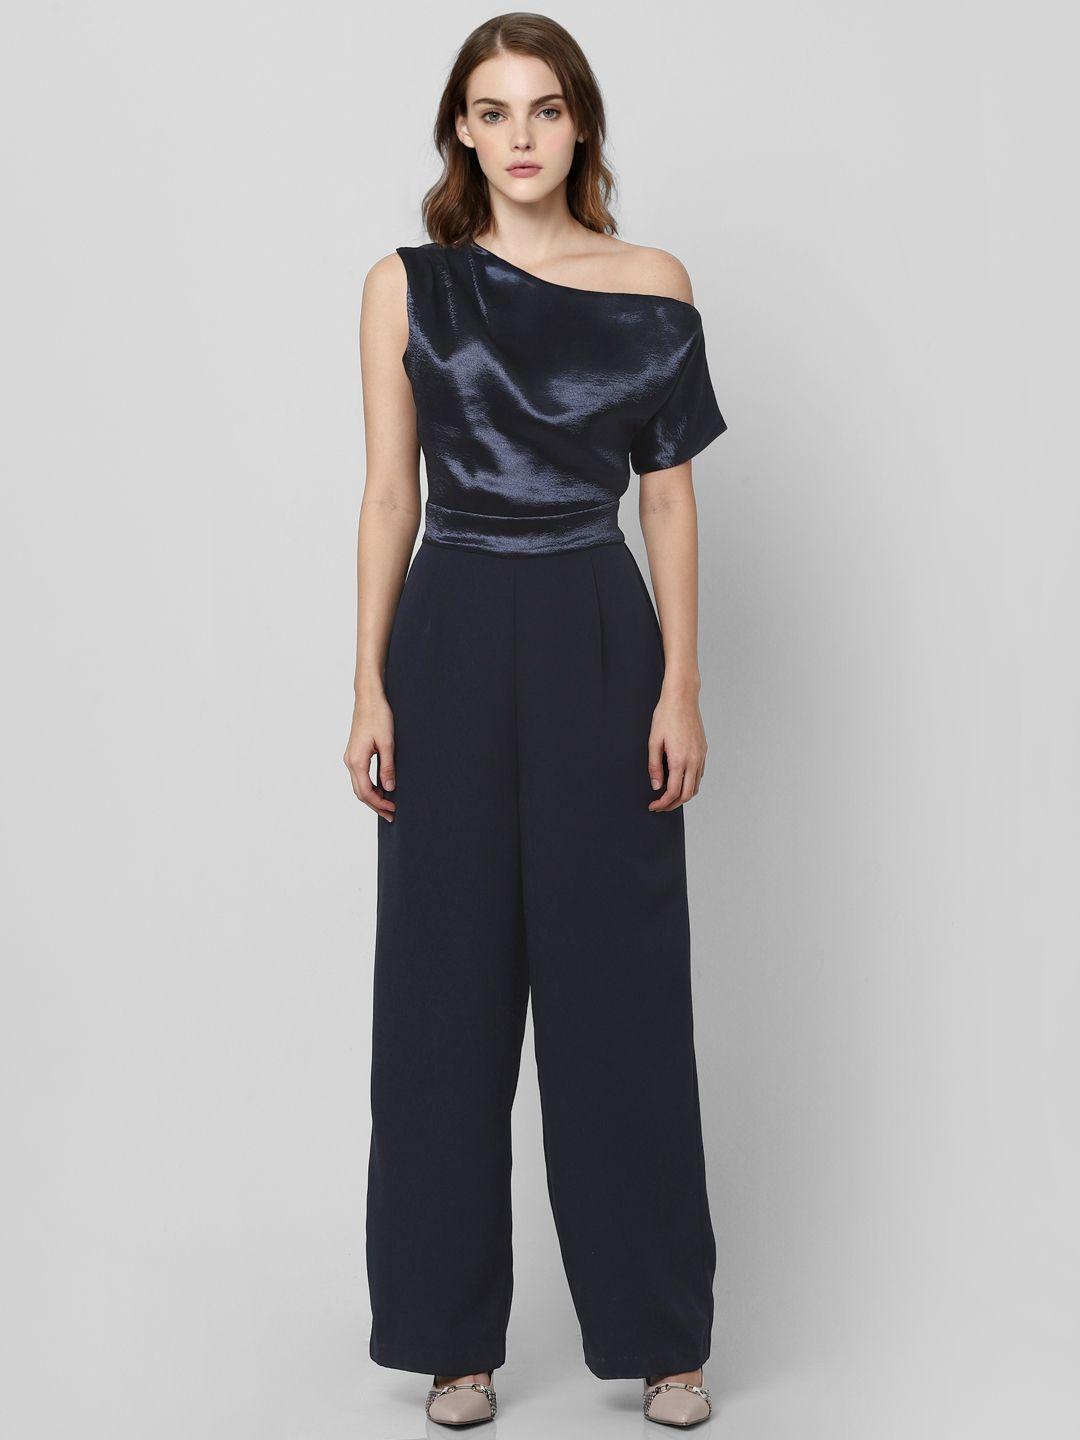 vero-moda-marquee-collection-women-blue-solid-one-shoulder-basic-jumpsuit